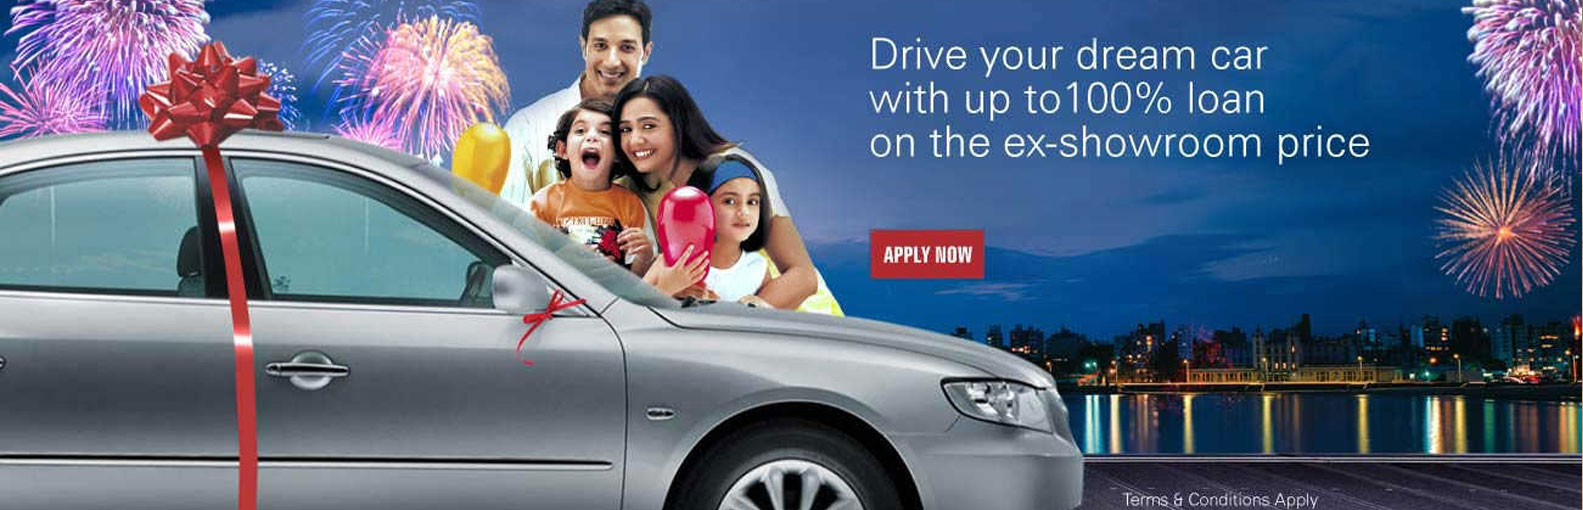 New India Finance Co. offer New Car Loan best Interest Rate 